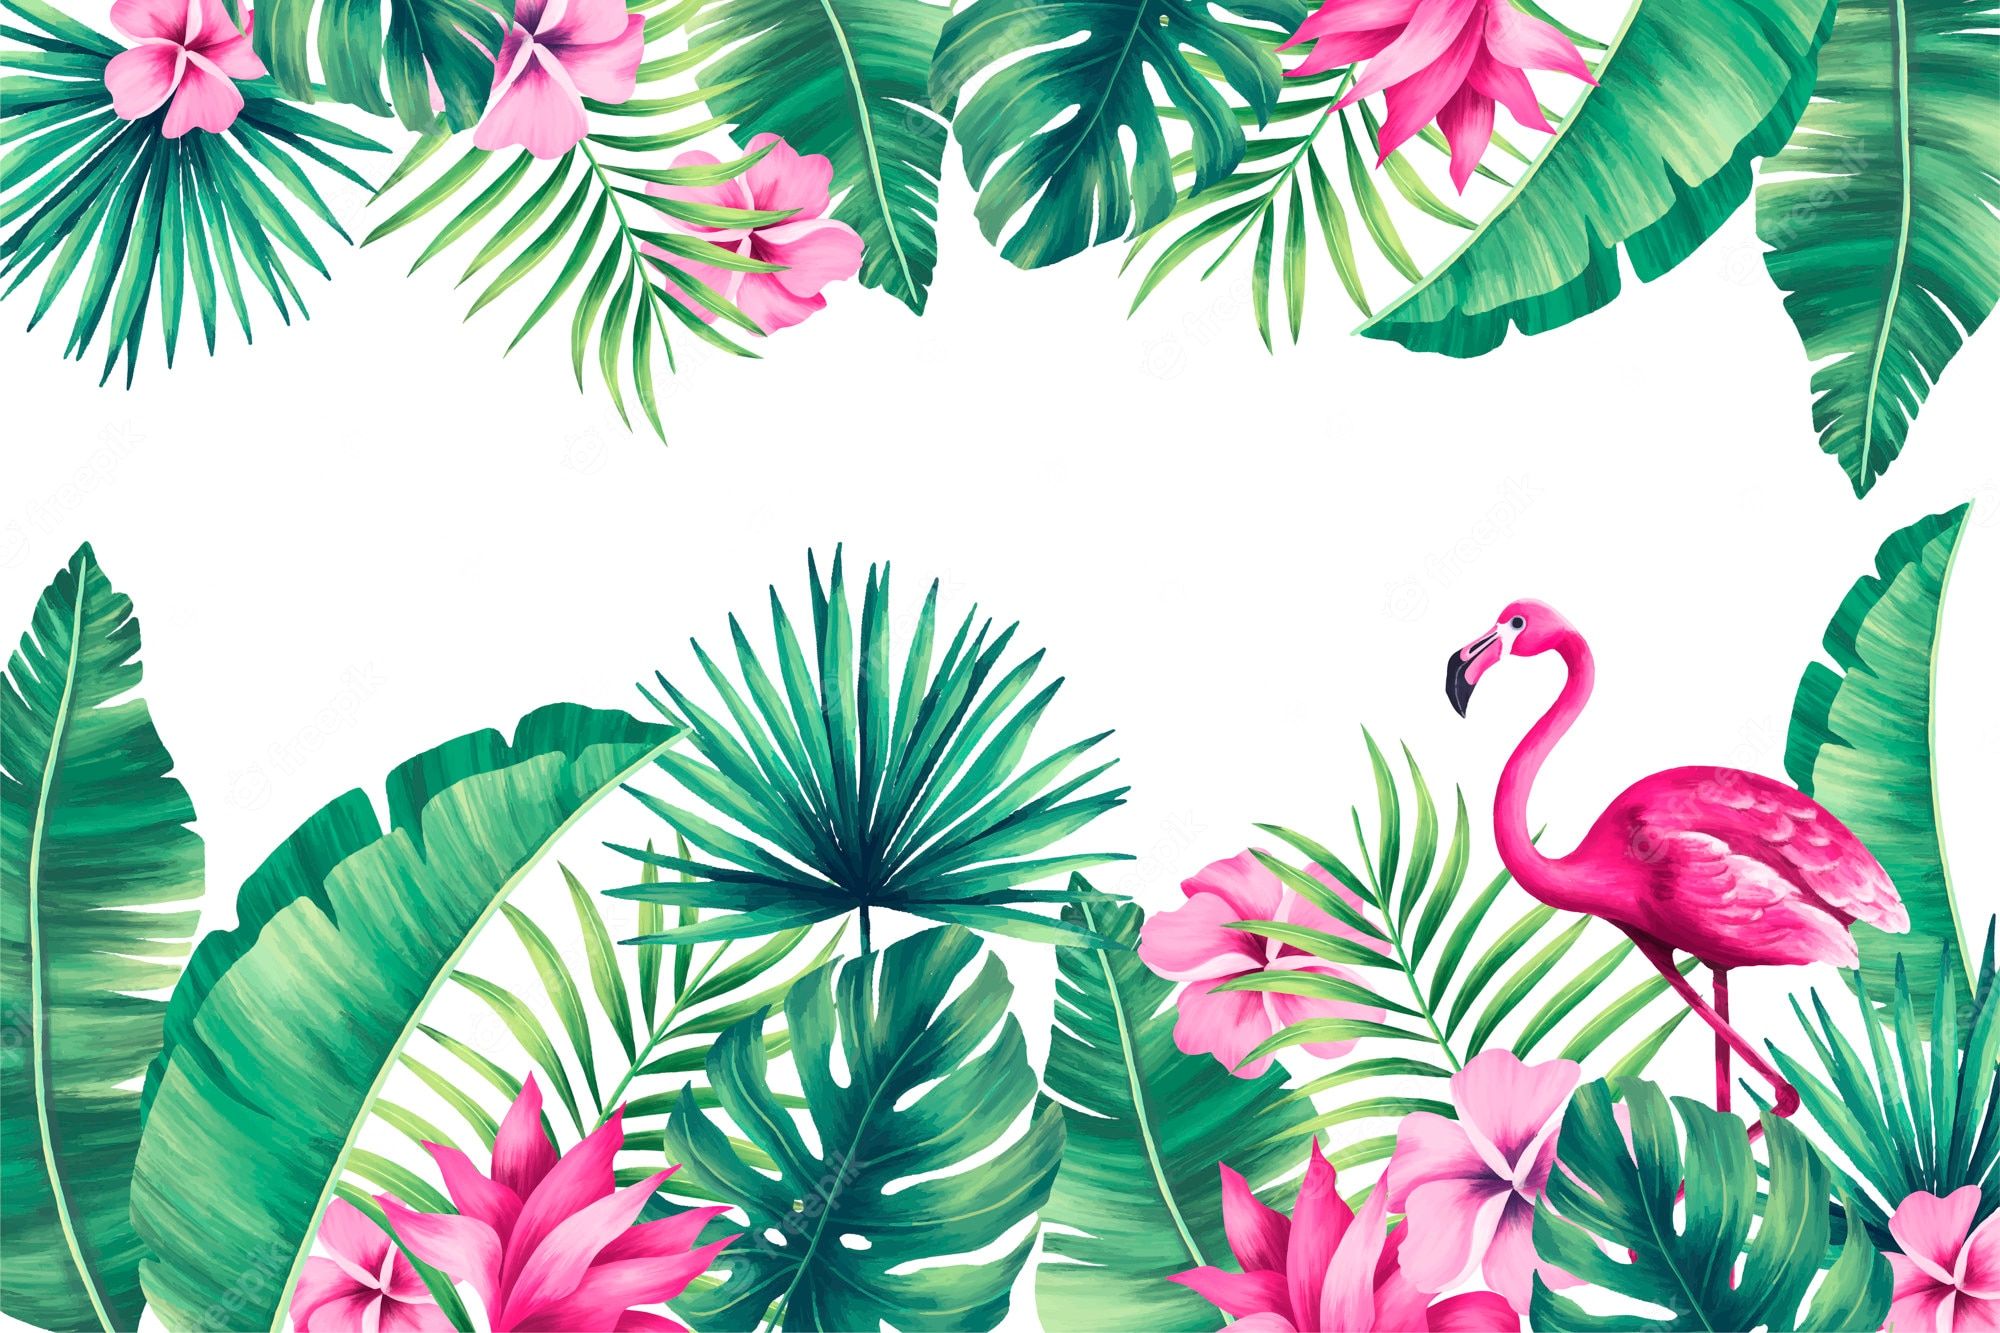 Tropical leaves with flamingo in the middle - Tropical